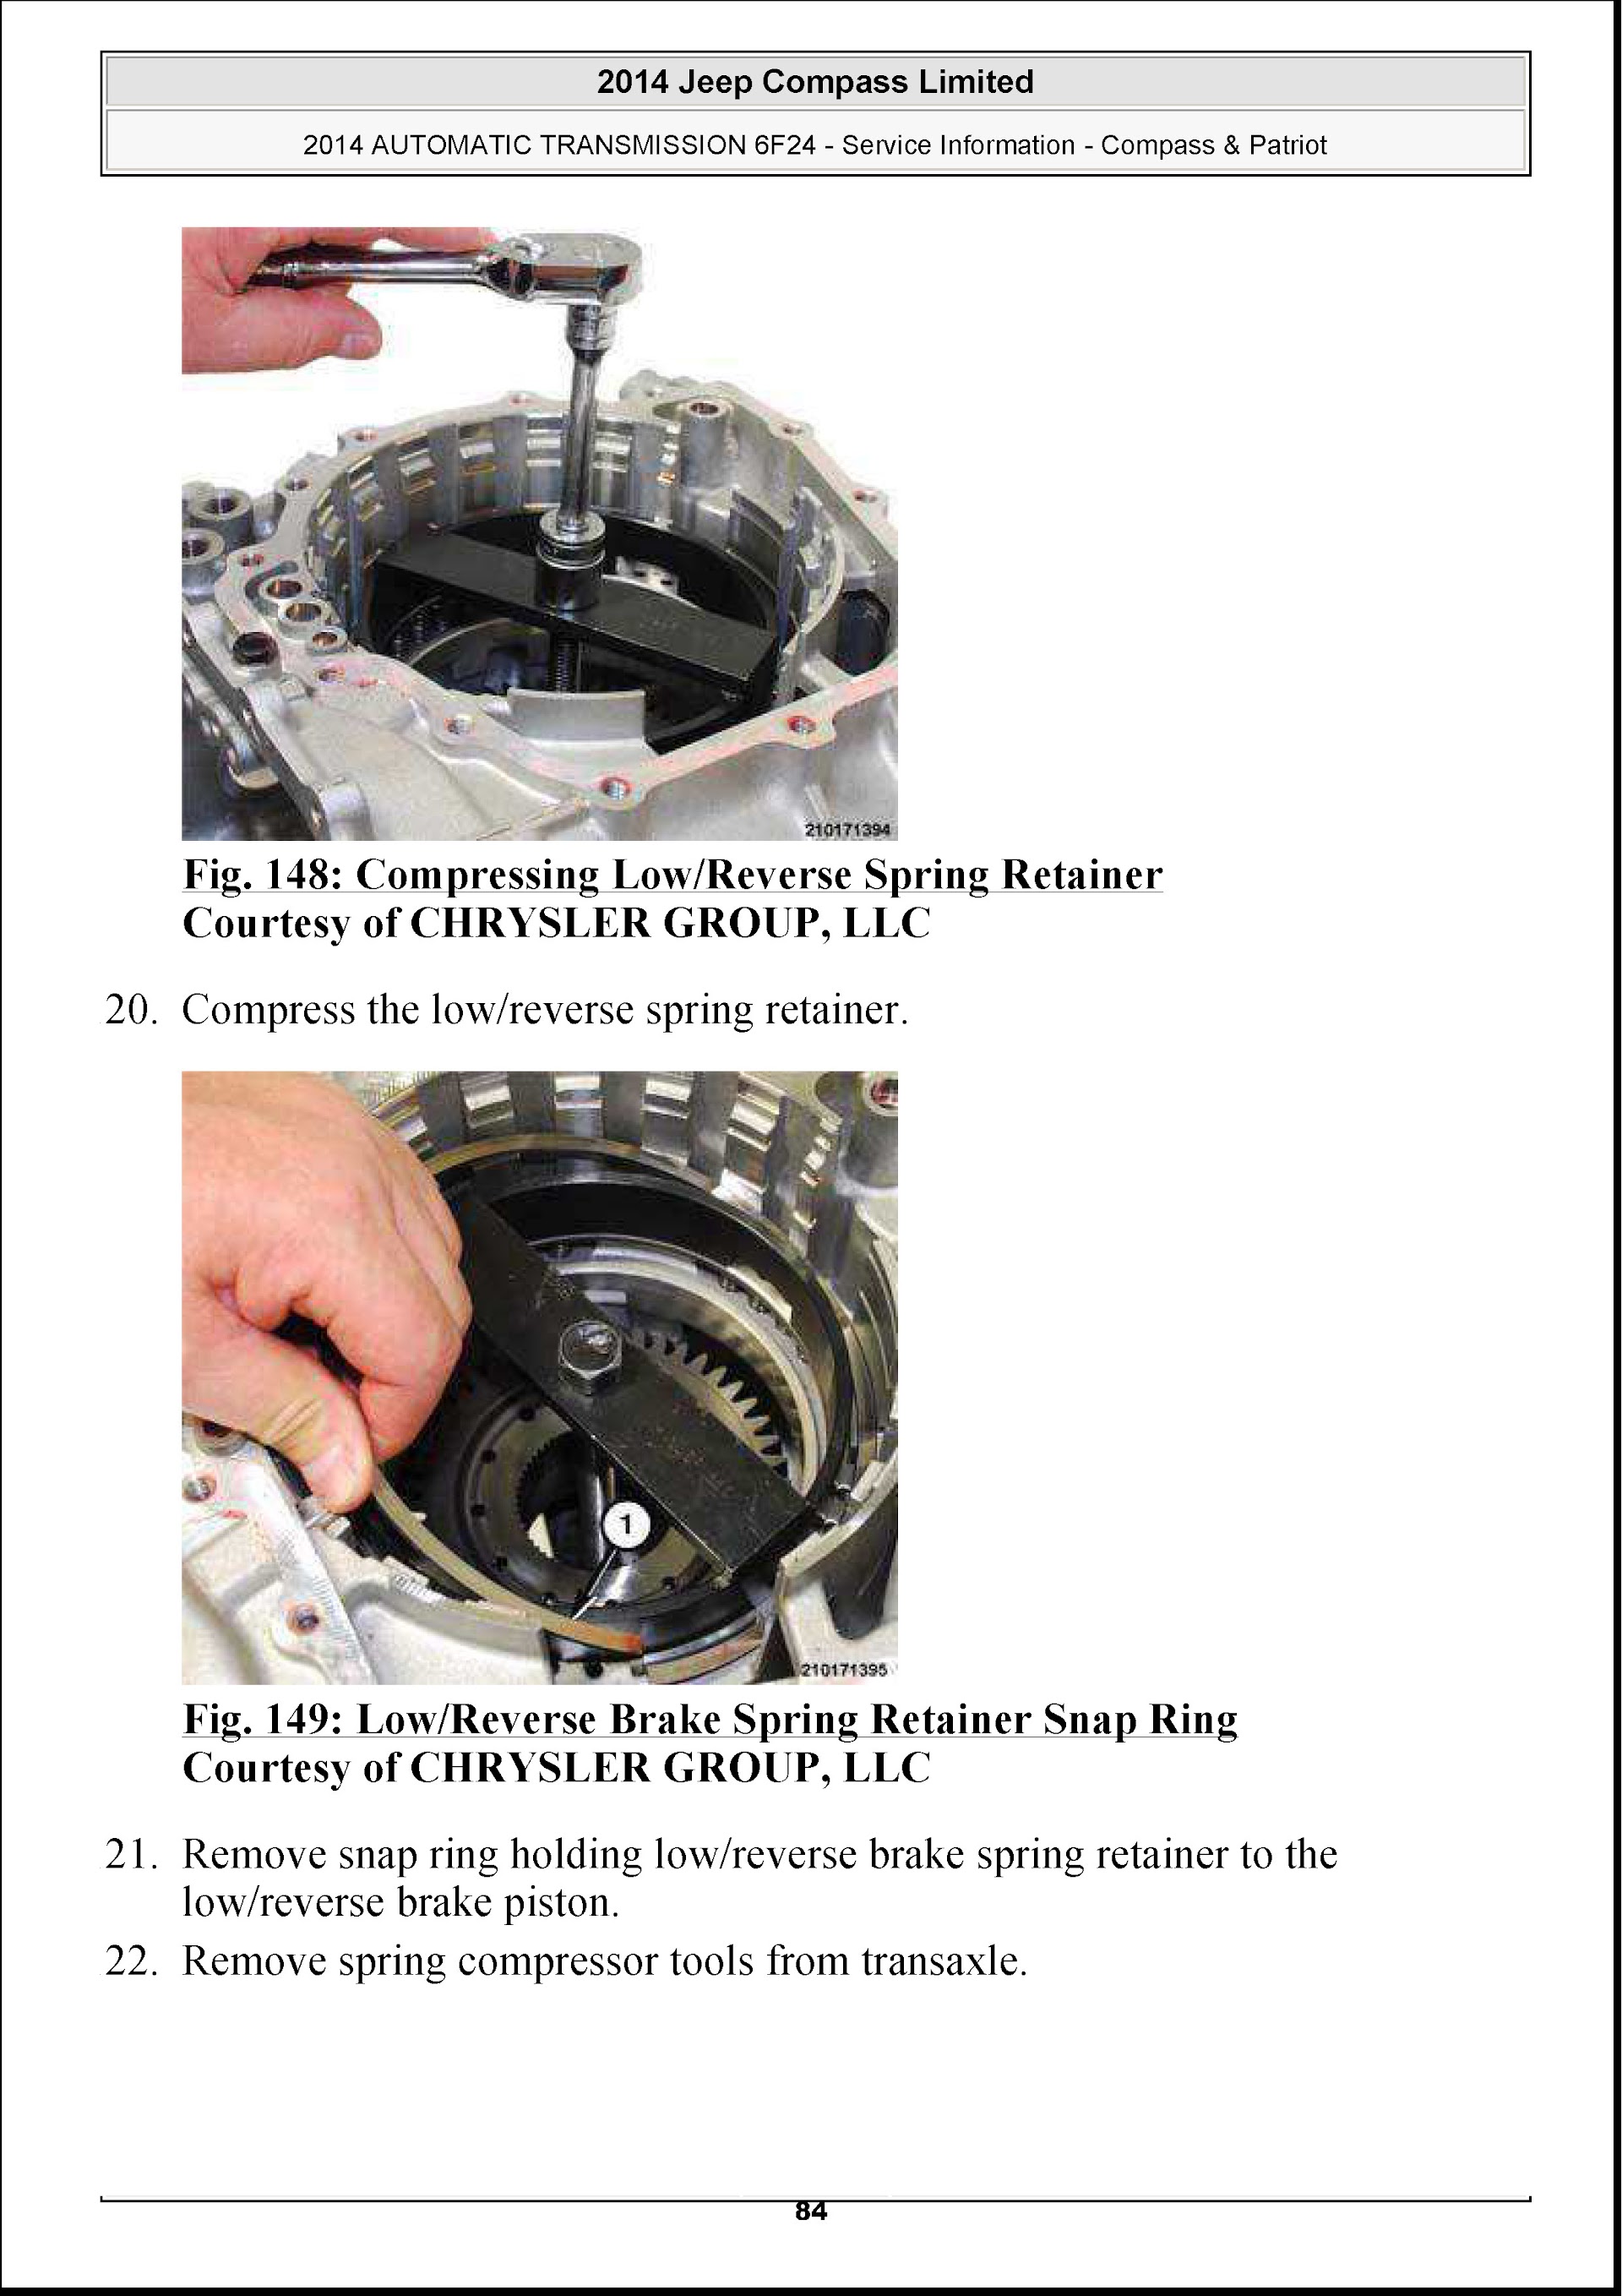 2014-2016 Jeep Compass and Patriot Repair Manual, Automatic Transmission 6F24 Service Information